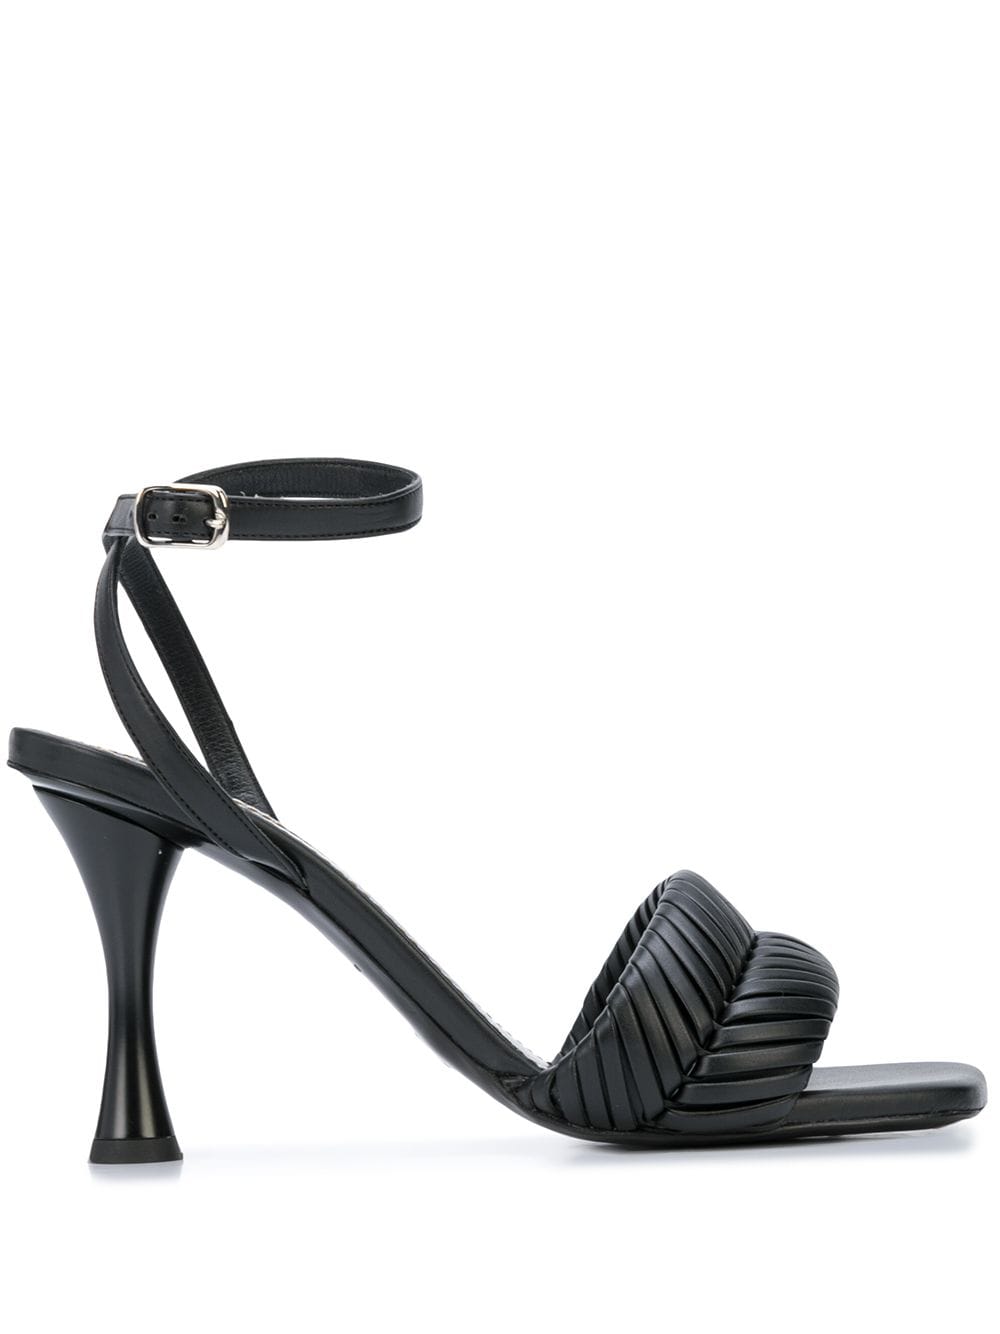 Proenza Schouler Braided Ankle Strap Sandals In Black | ModeSens